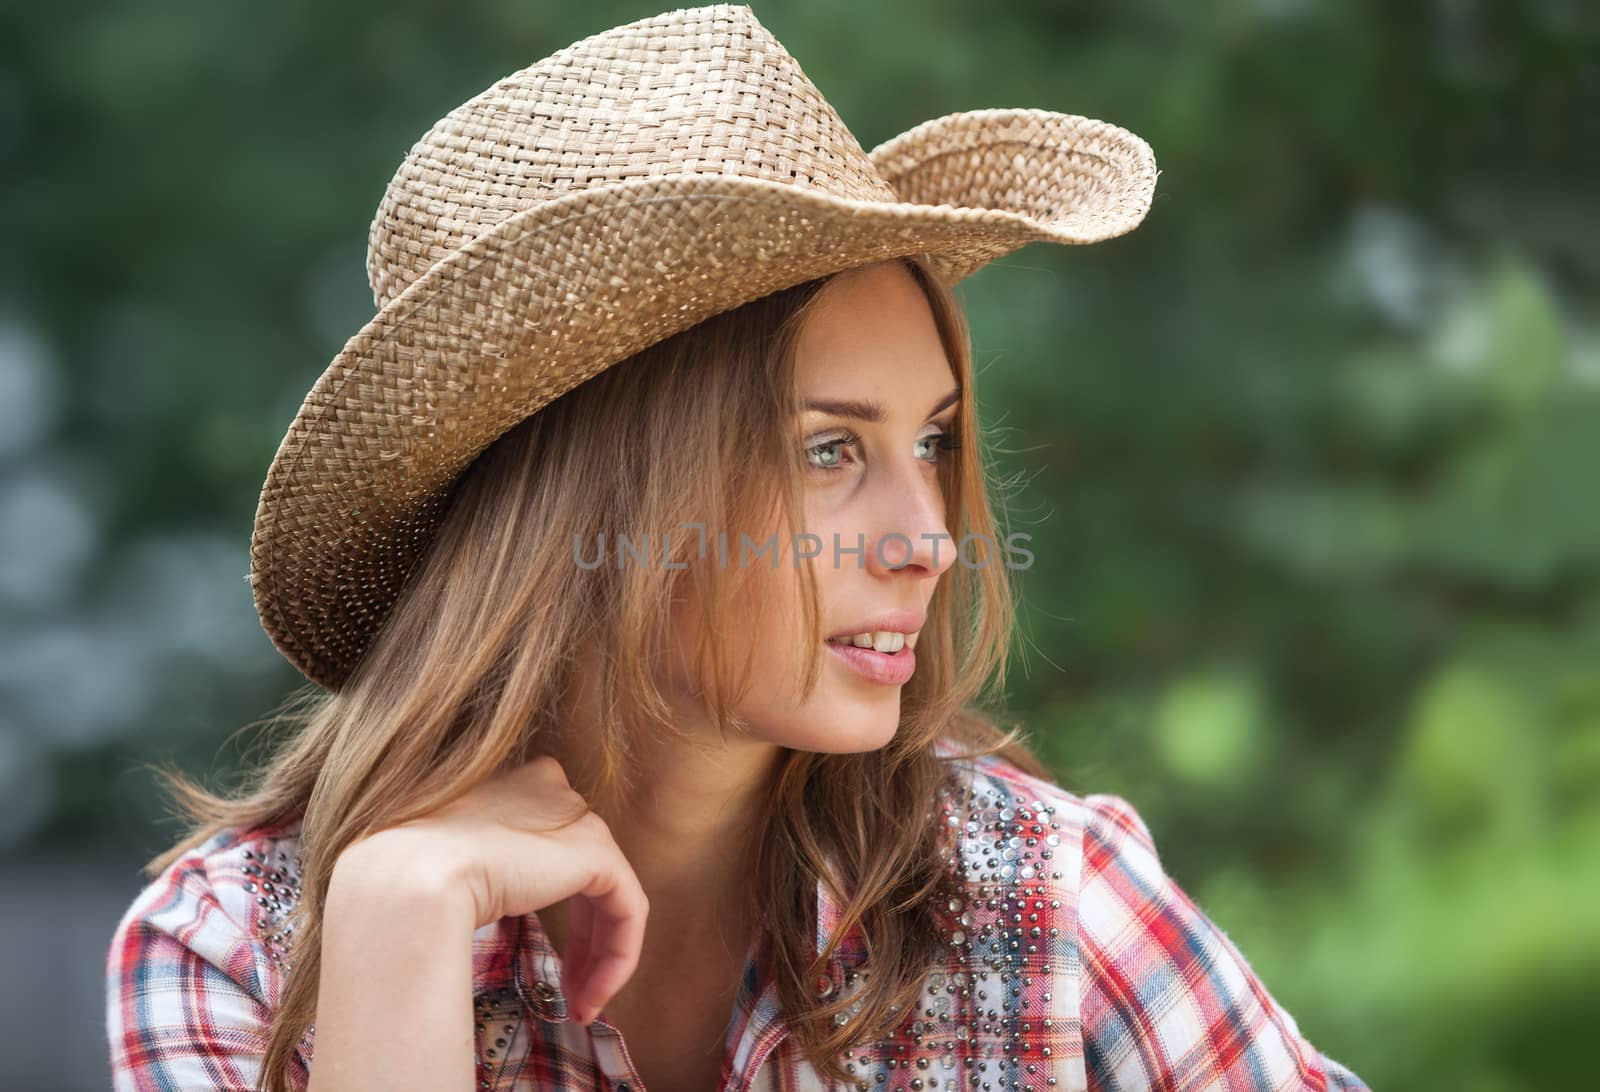 Sexy cowgirl. Young woman portrait in a hat